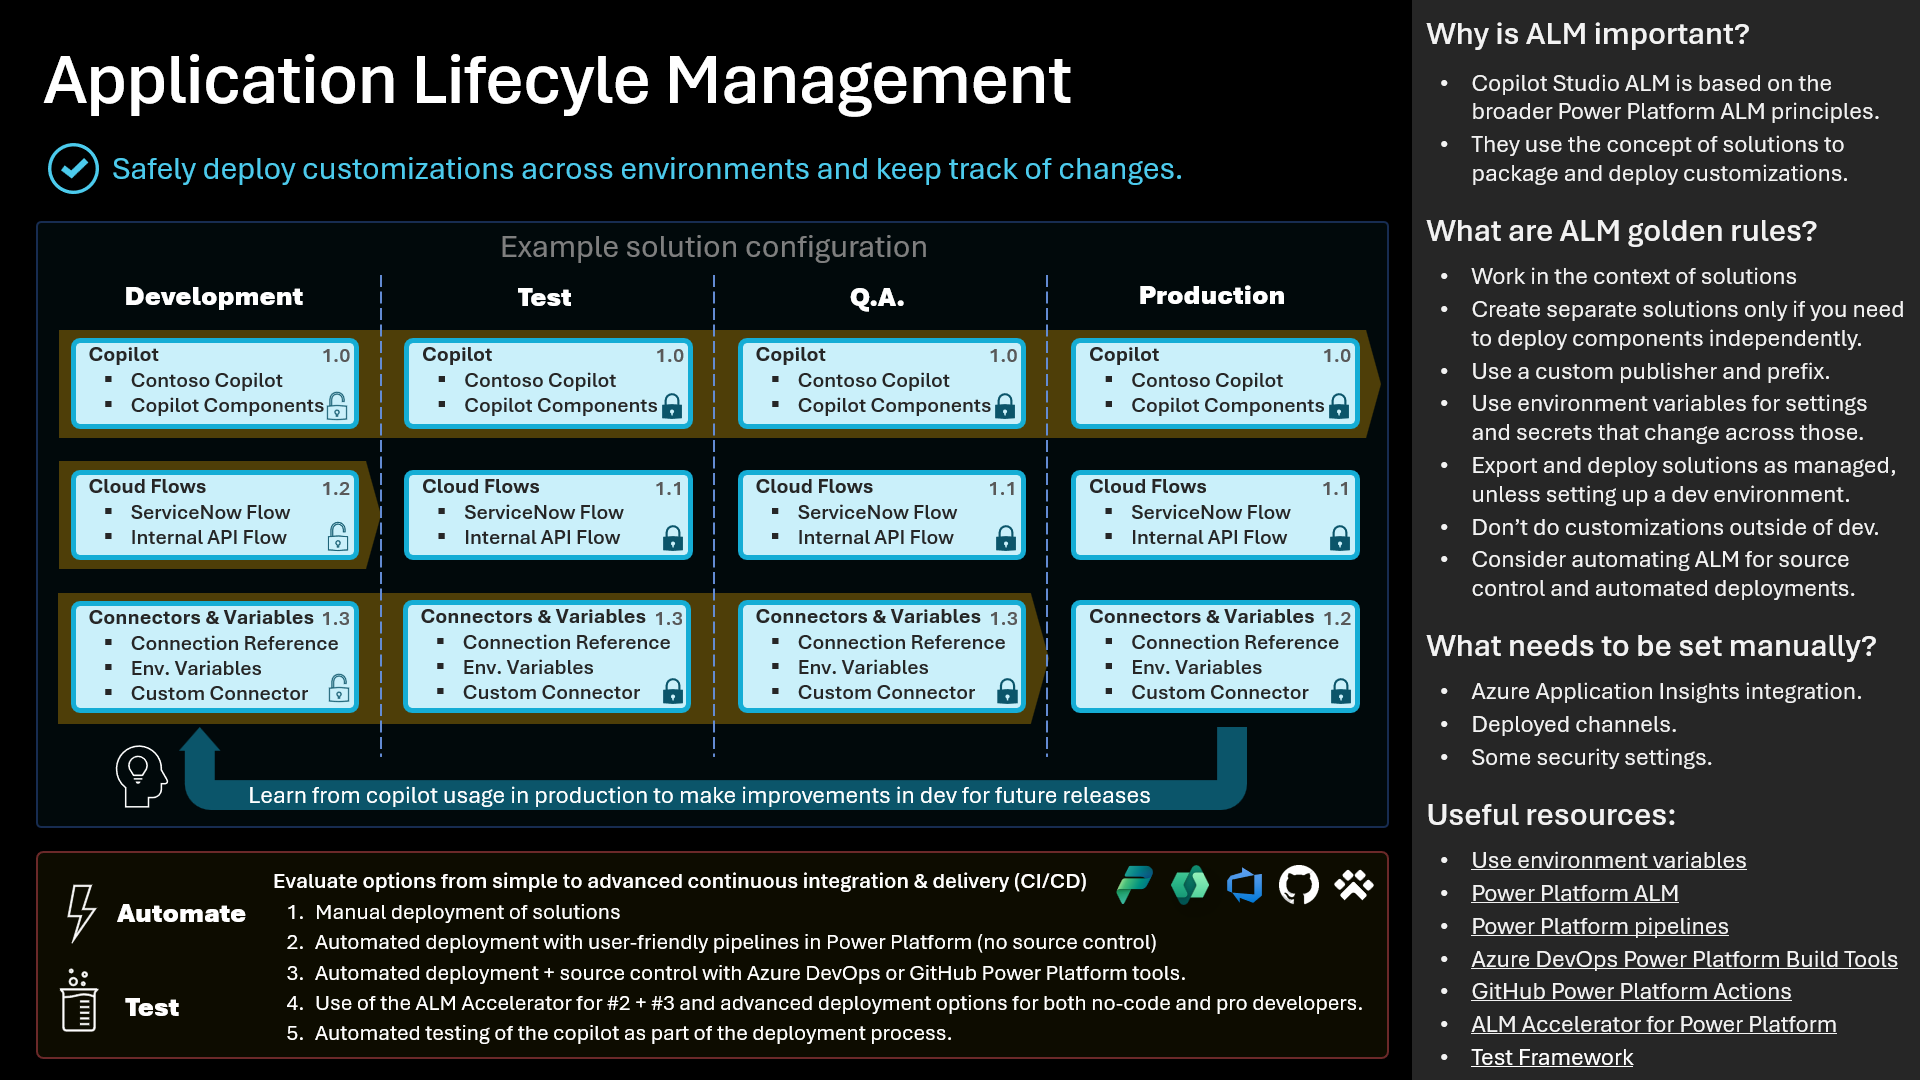 Screenshot of the Application Lifecycle Management slide